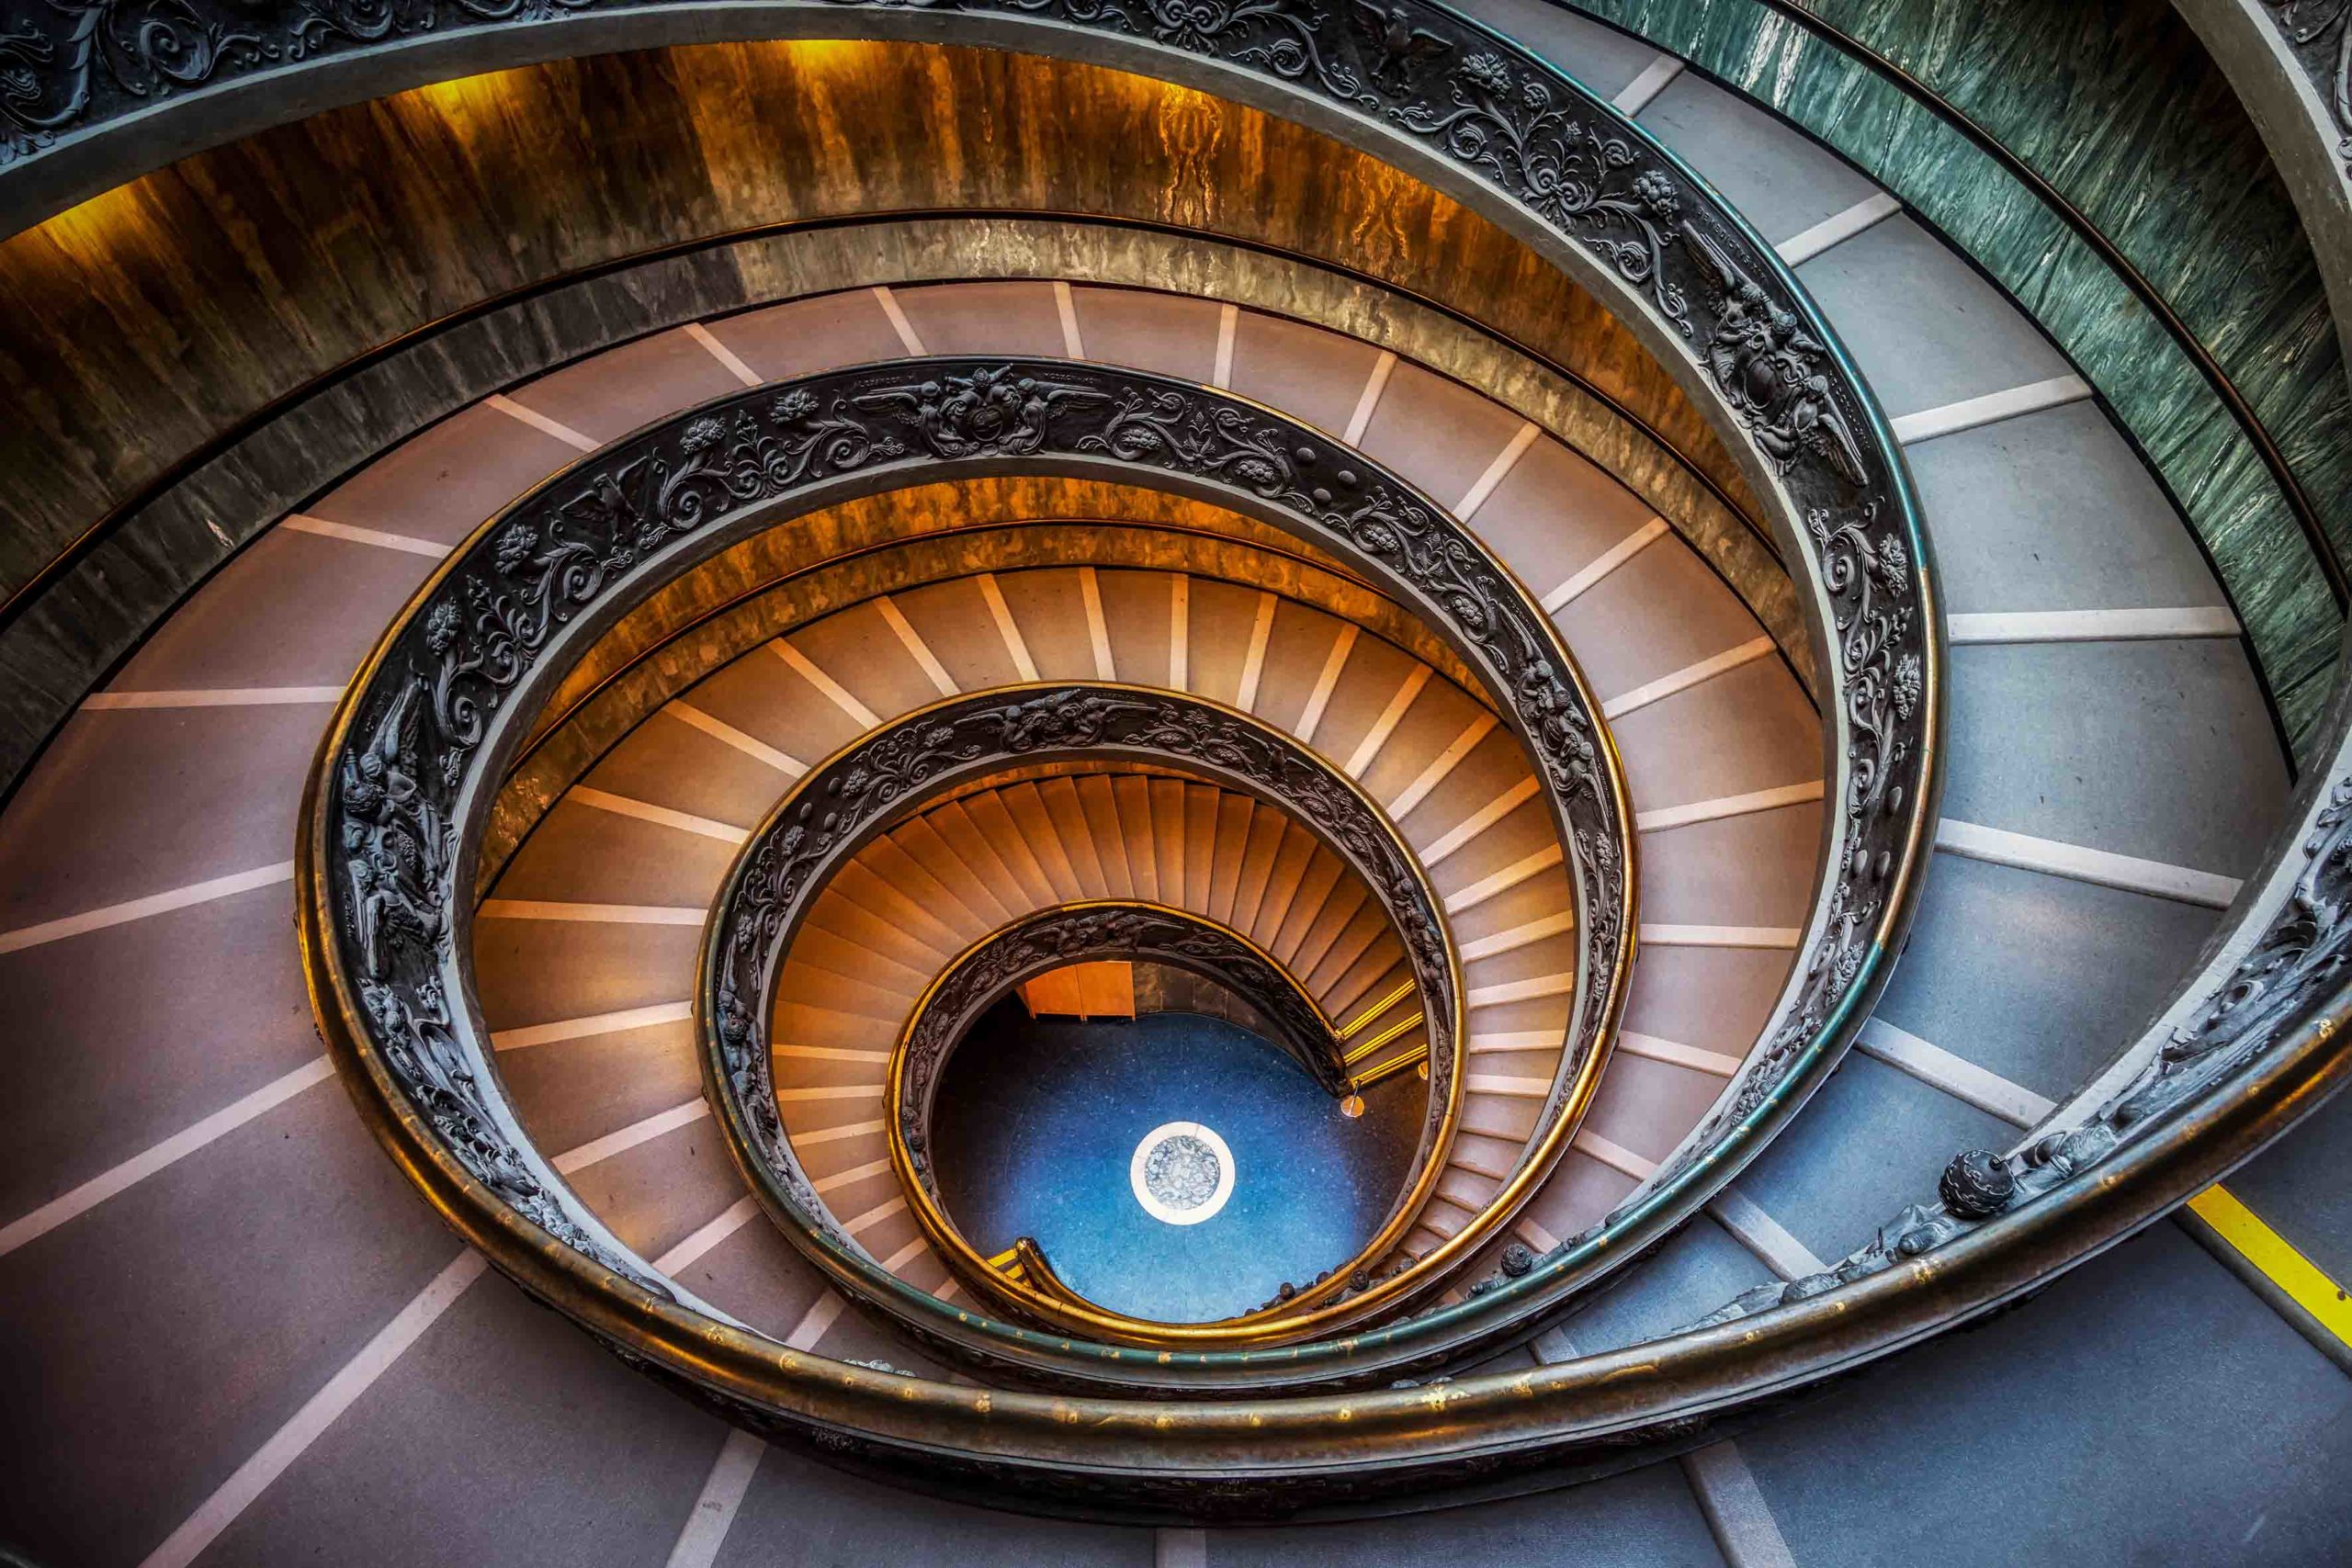 Vatican museum spiral staircase. taken from the top